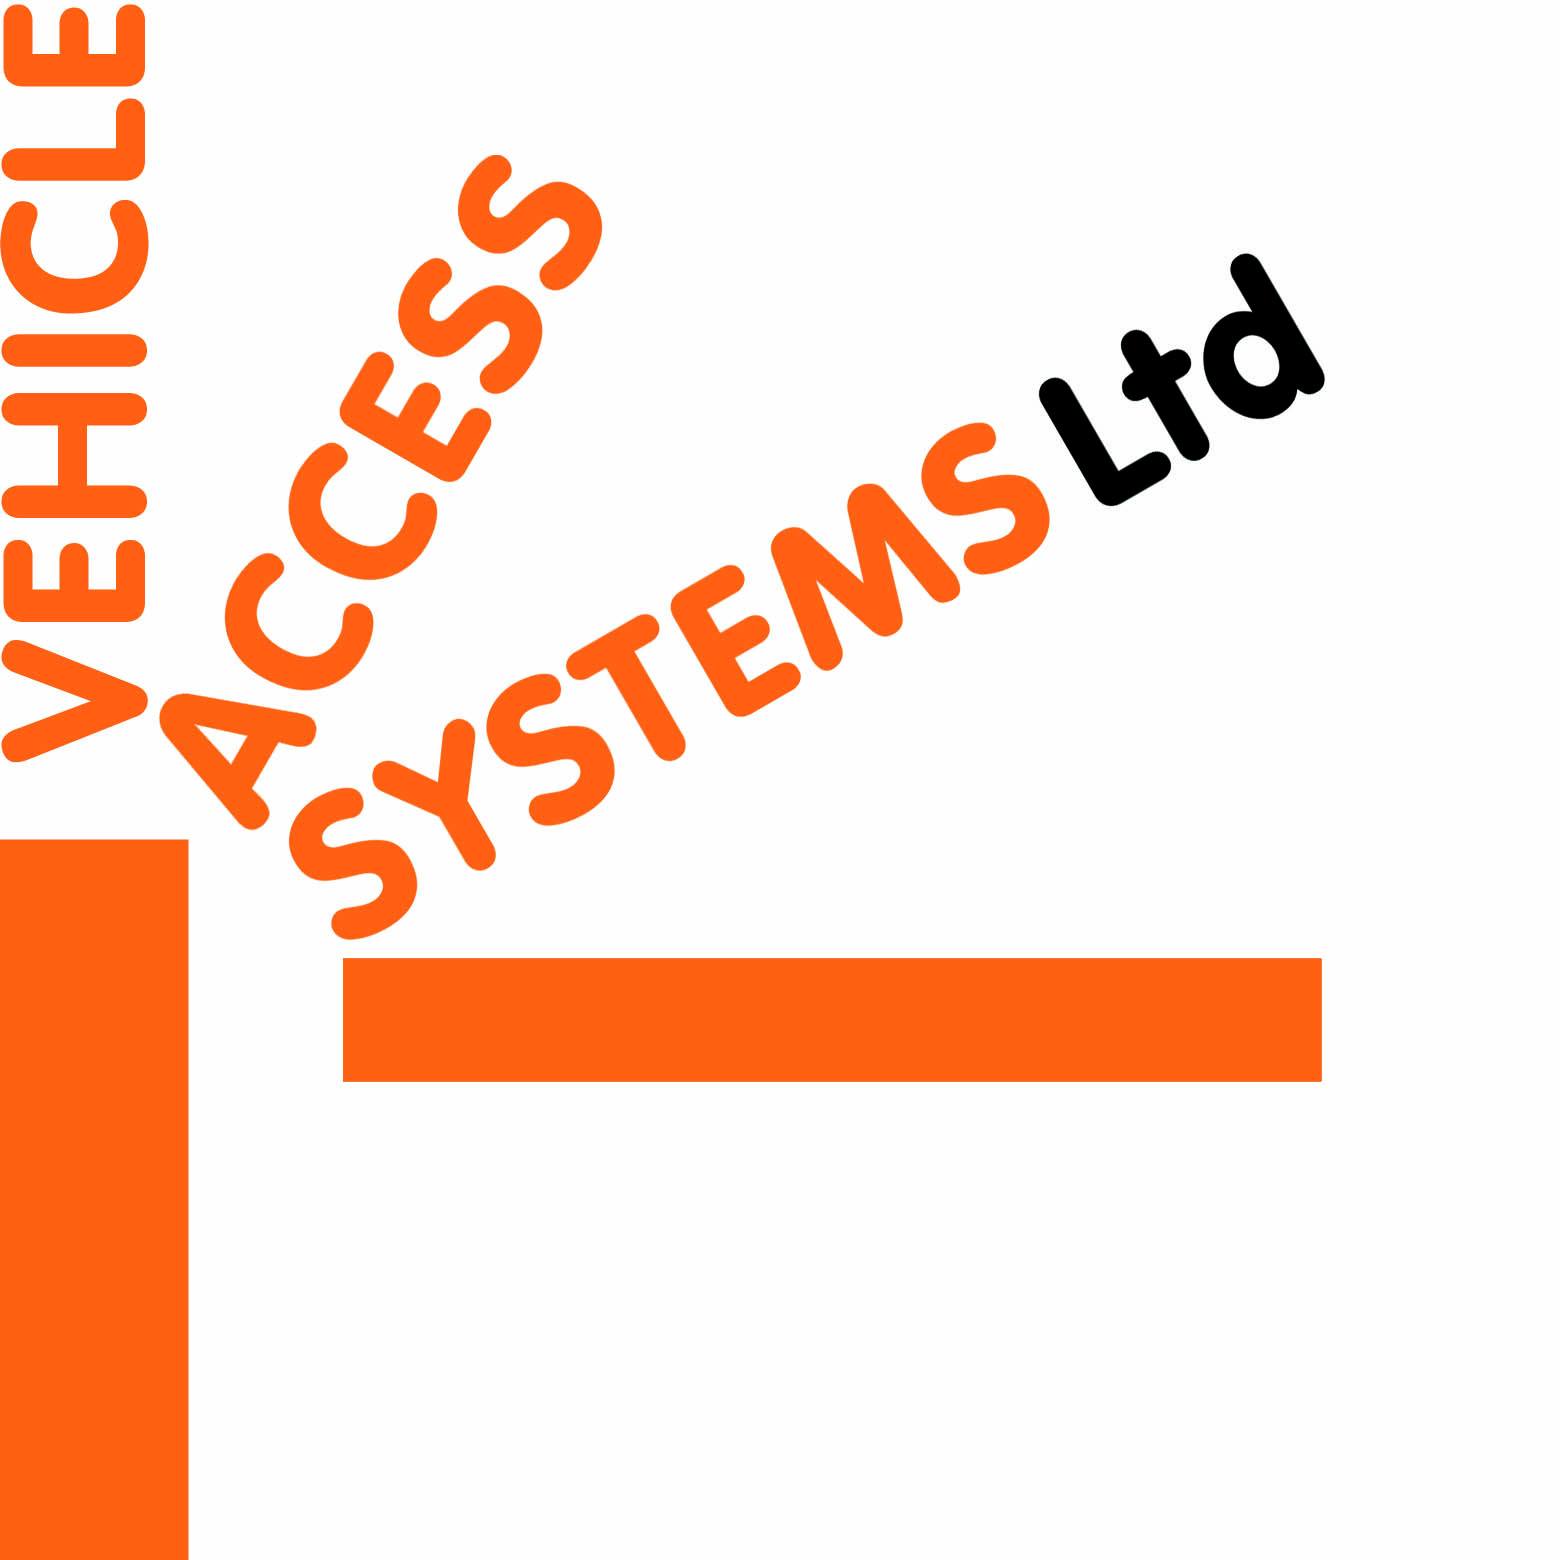 Vehicle Access Systems Ltd